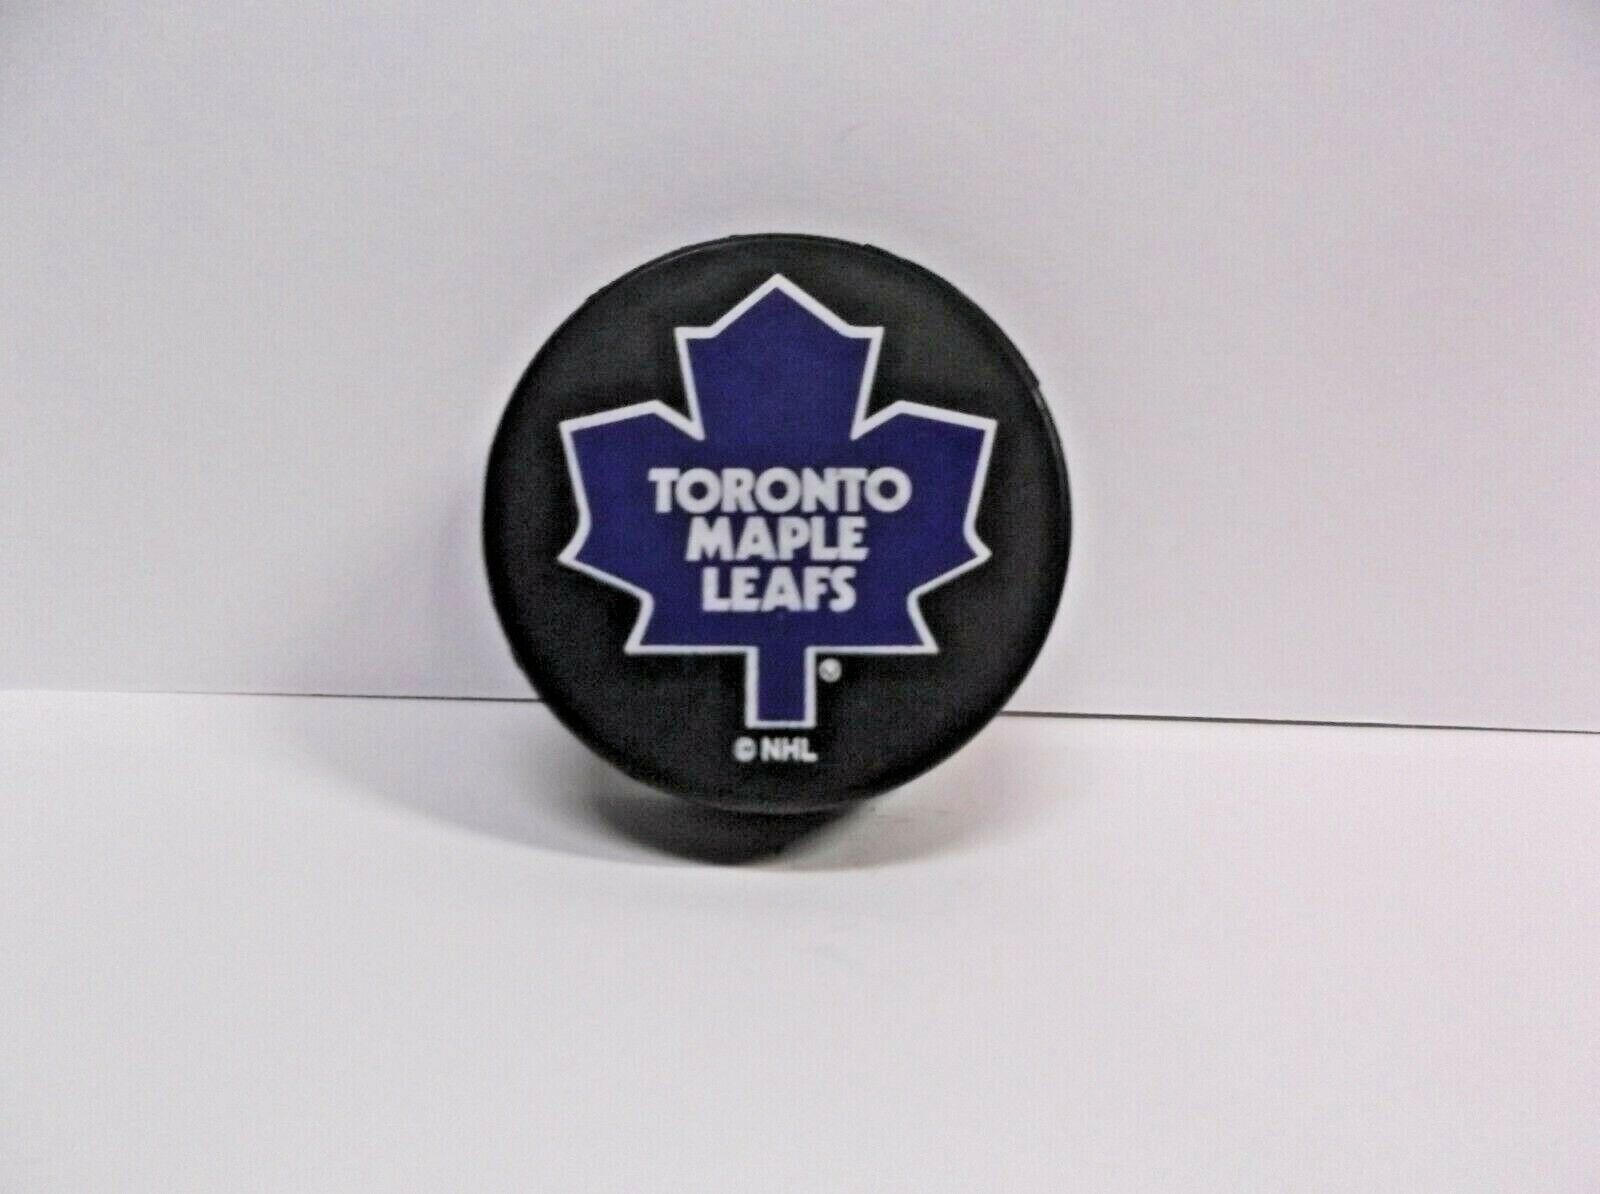 Toronto Maple Leafs Official Licensed Logo Puck